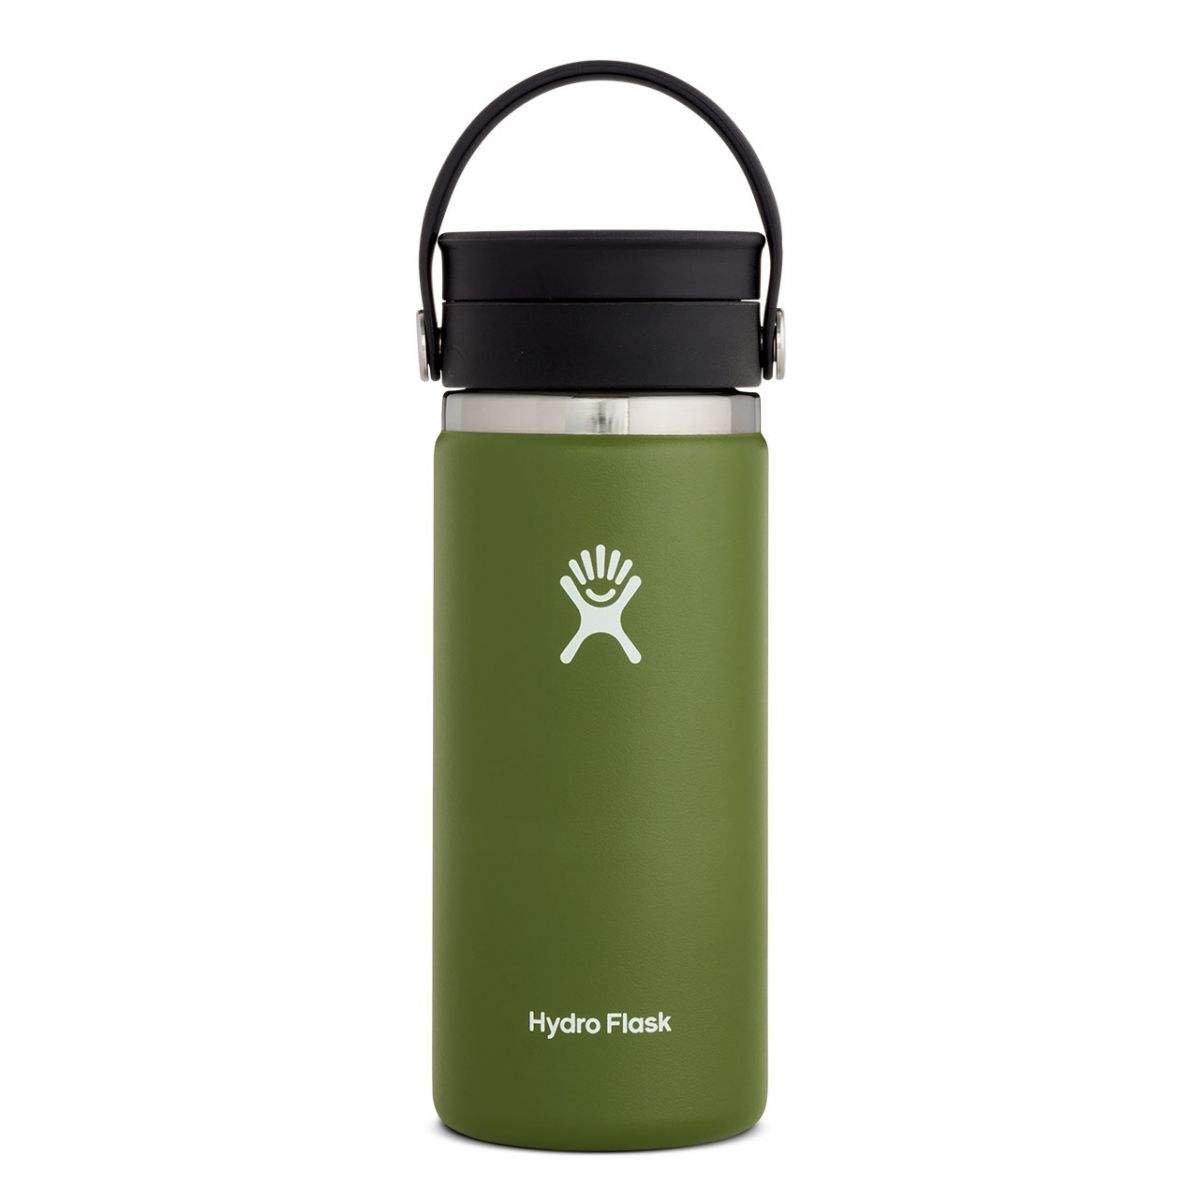 16 oz Coffee Flask w/ Flex Sip Lid ny Hydro Flask - The Luxury Promotional Gifts Company Limited